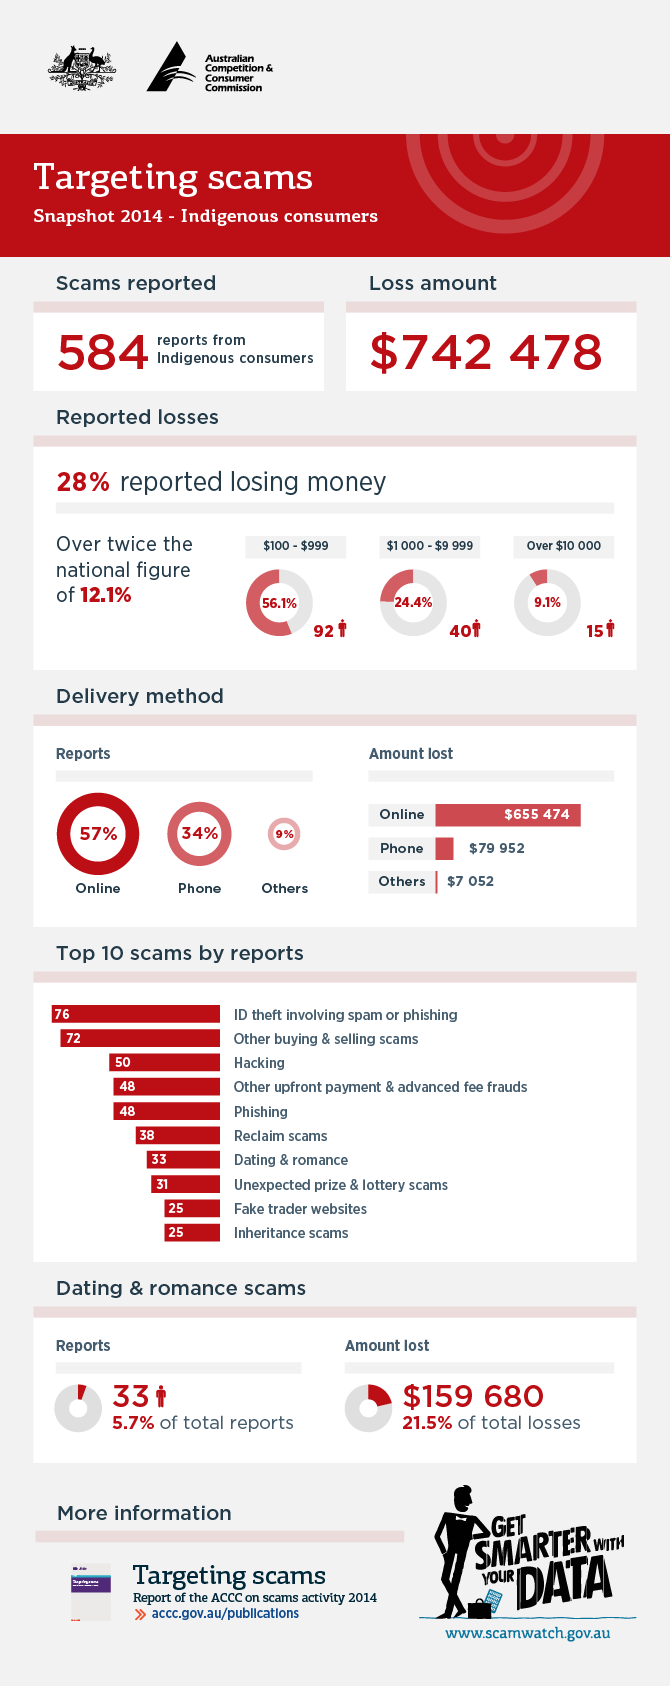 Targeting scams snapshot 2014 - indigenous consumers - infographic